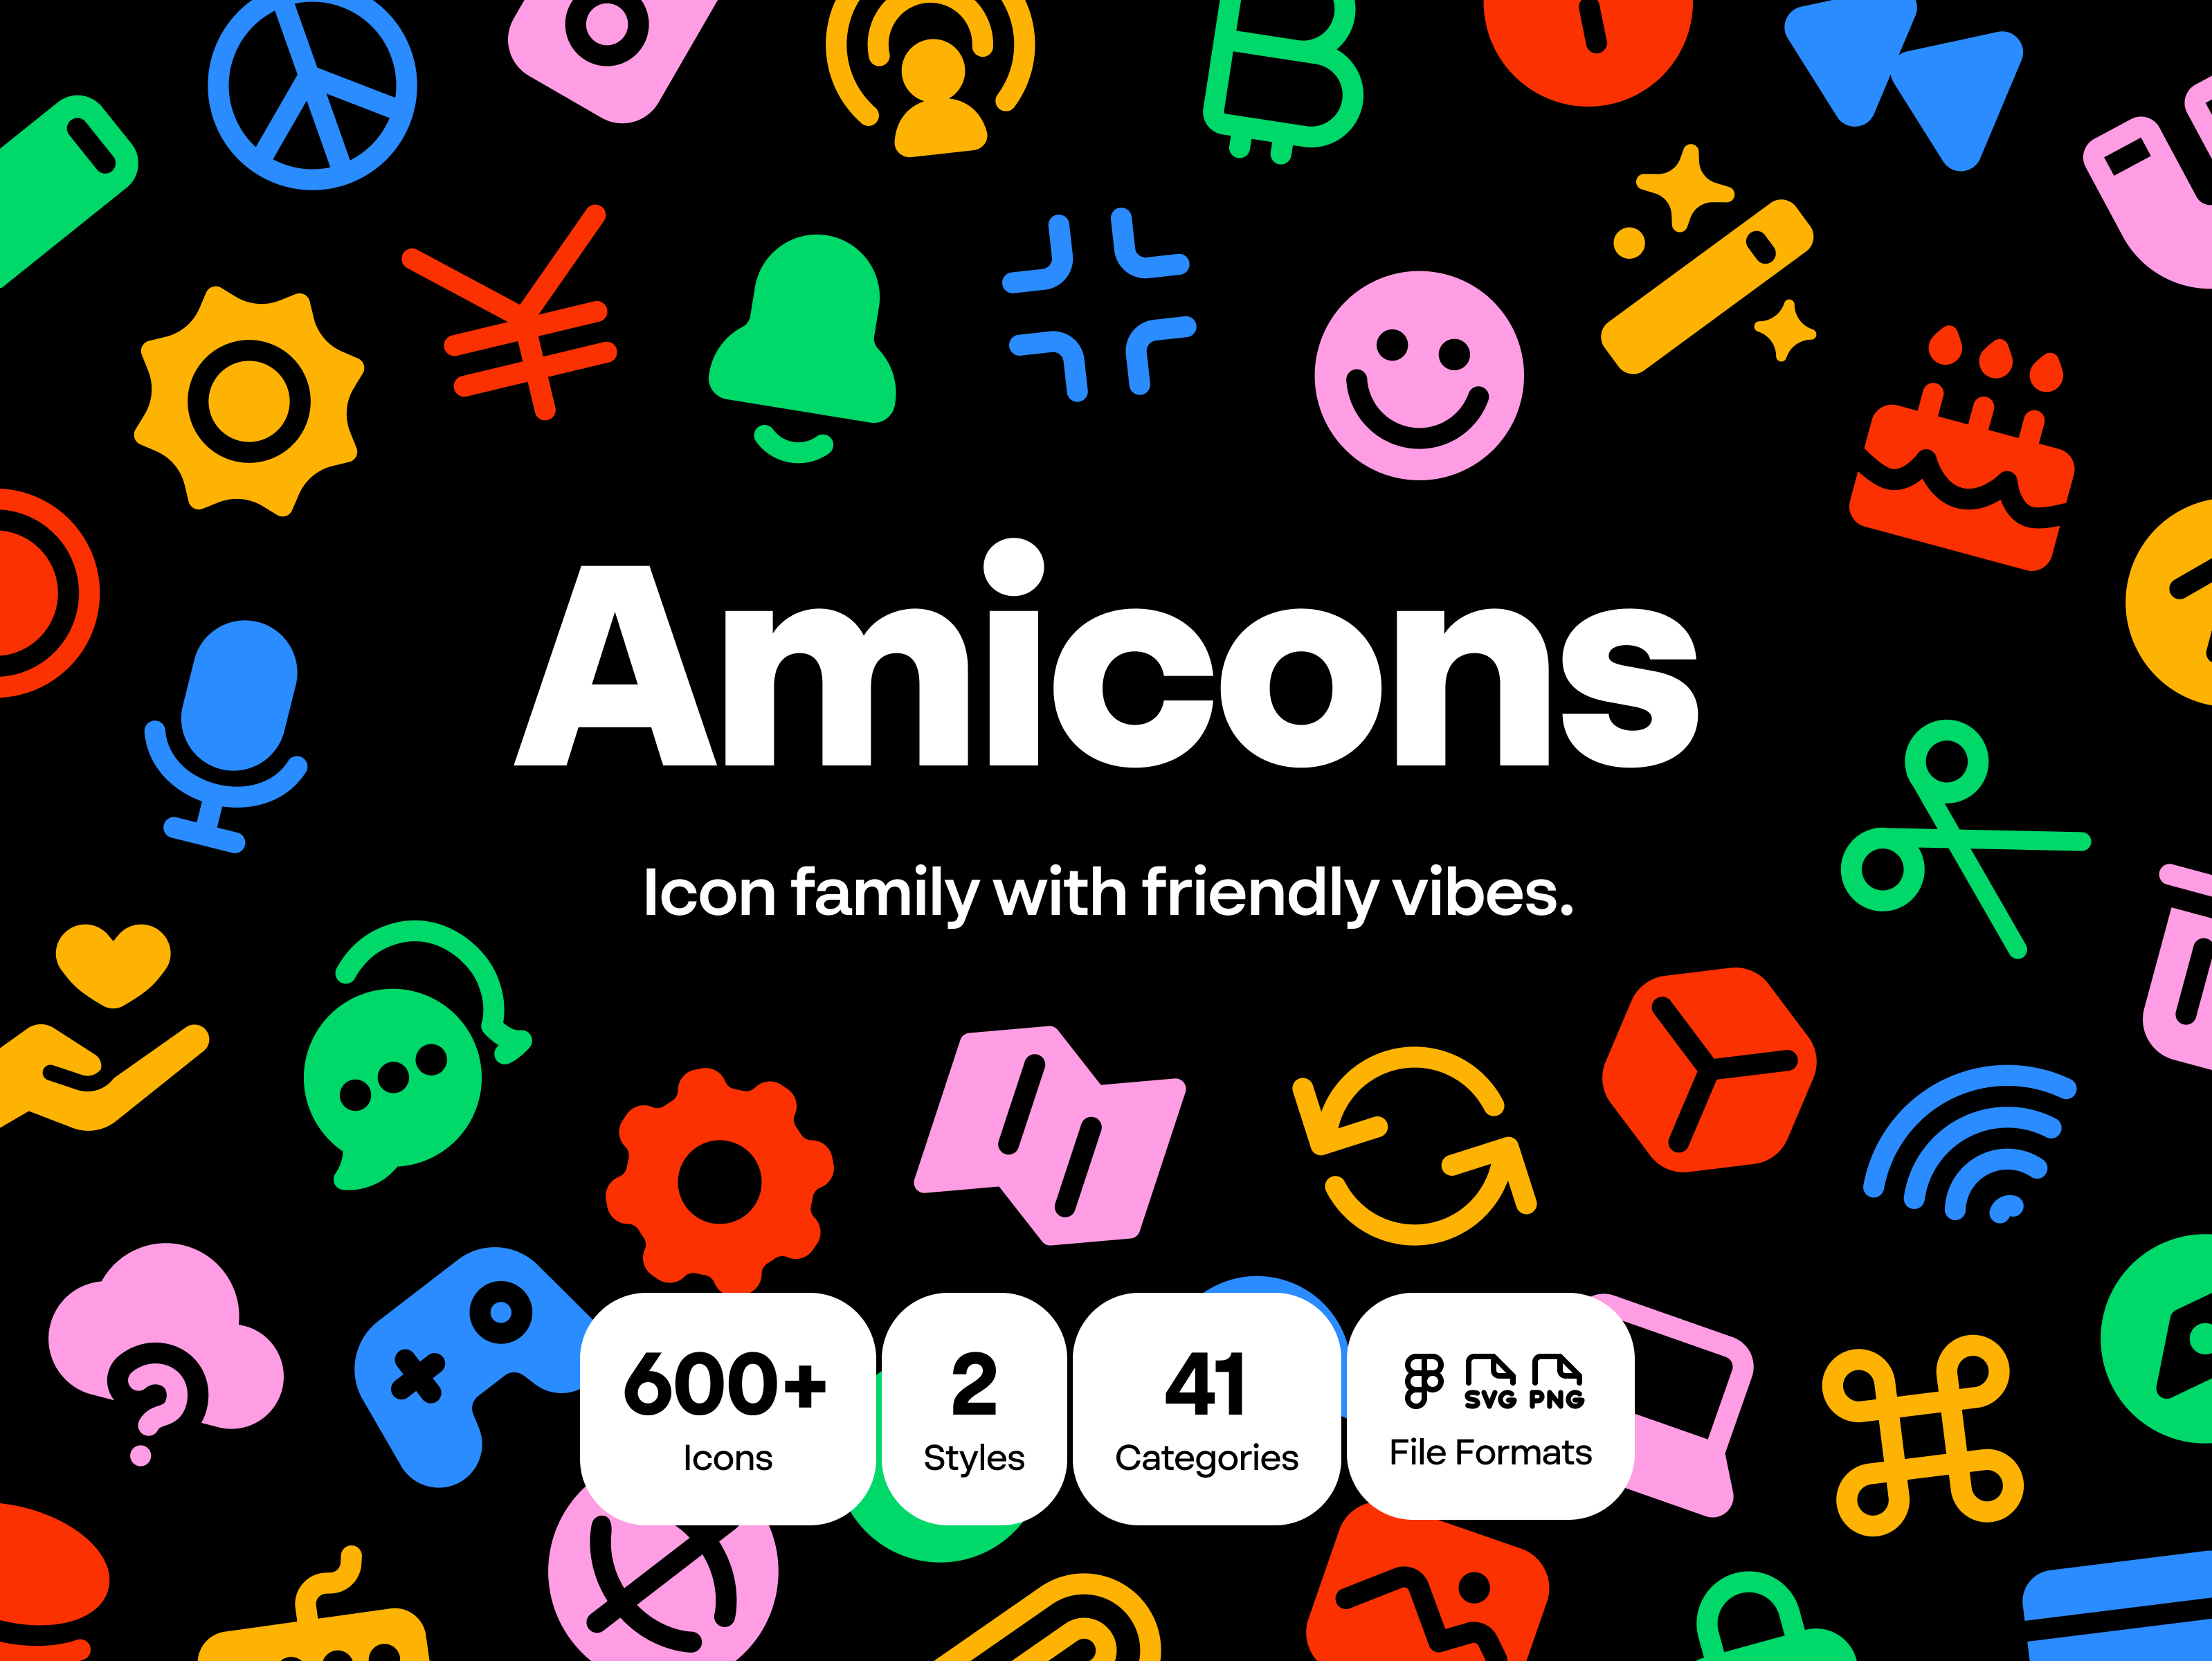 Amicons Cover